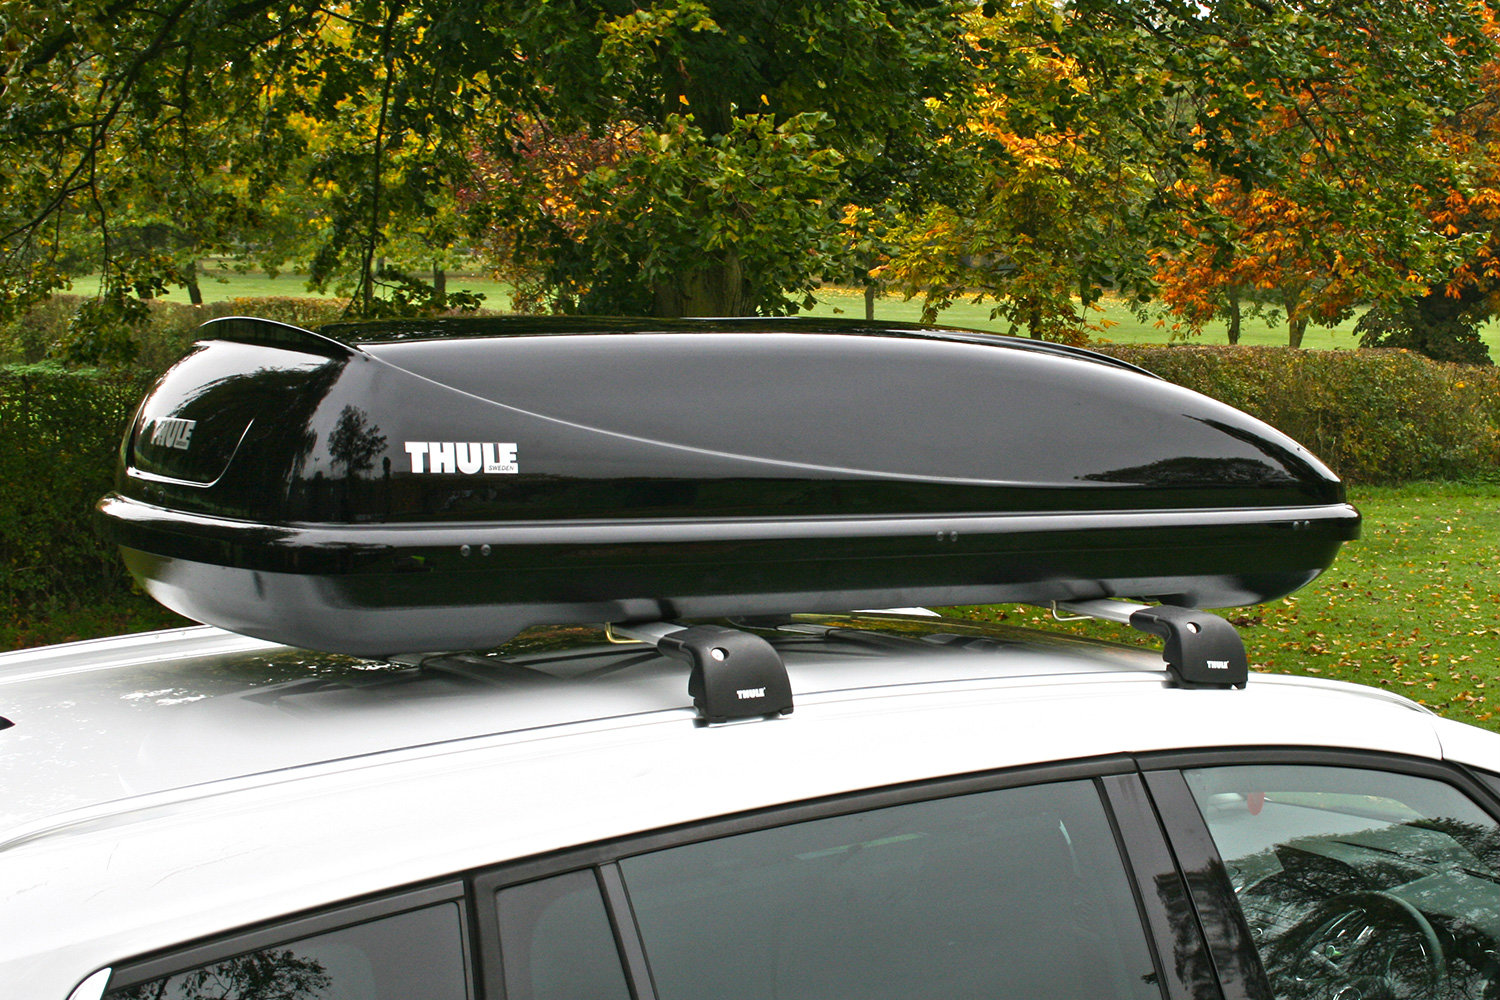 Product review of the Thule Ocean 200